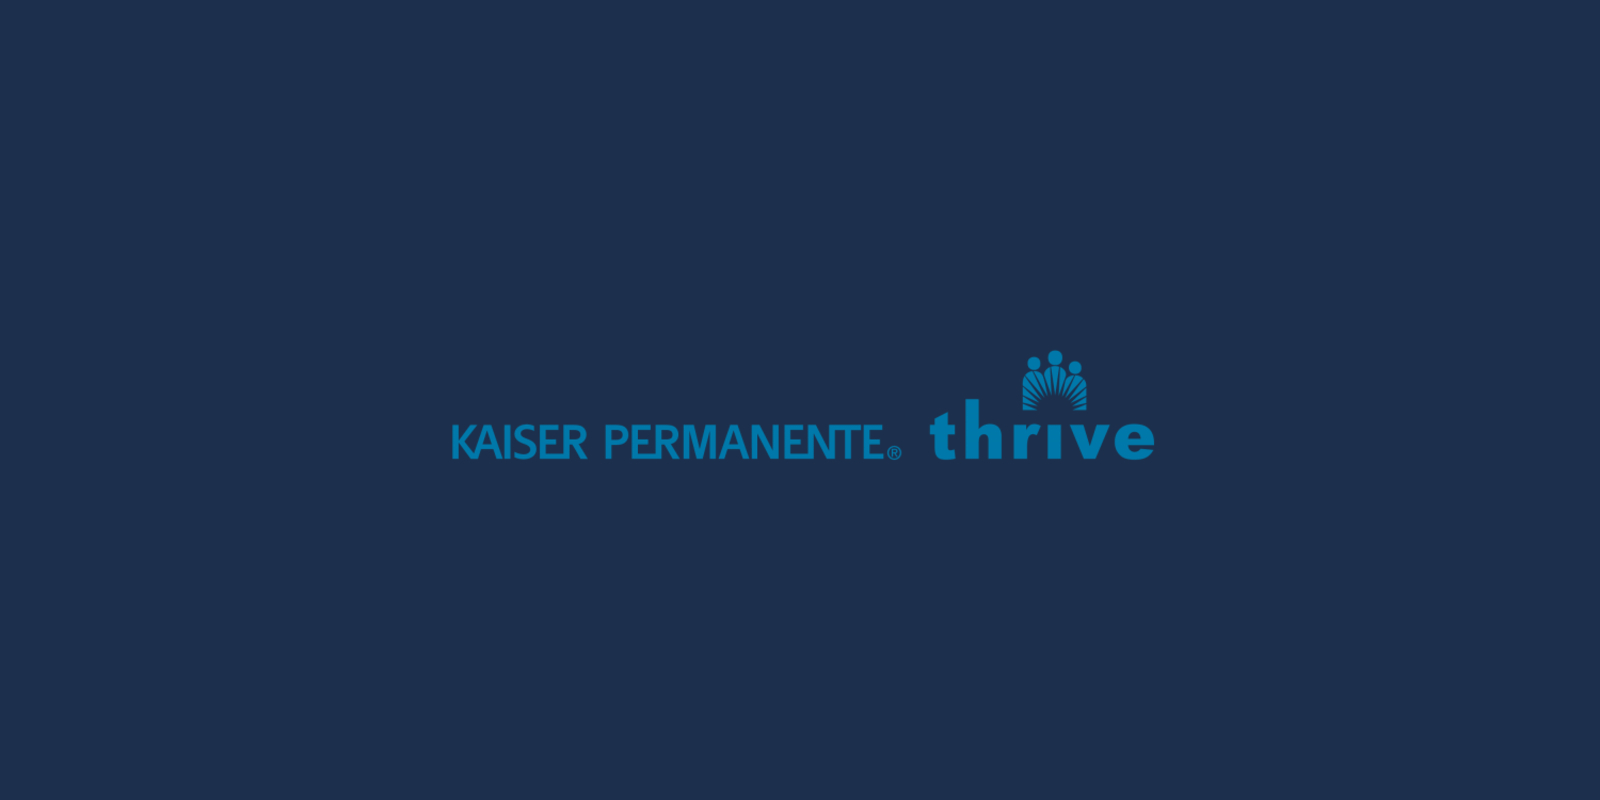 Thrive or Revive? The Kaiser Permanente 'Thrive' Marketing Programs